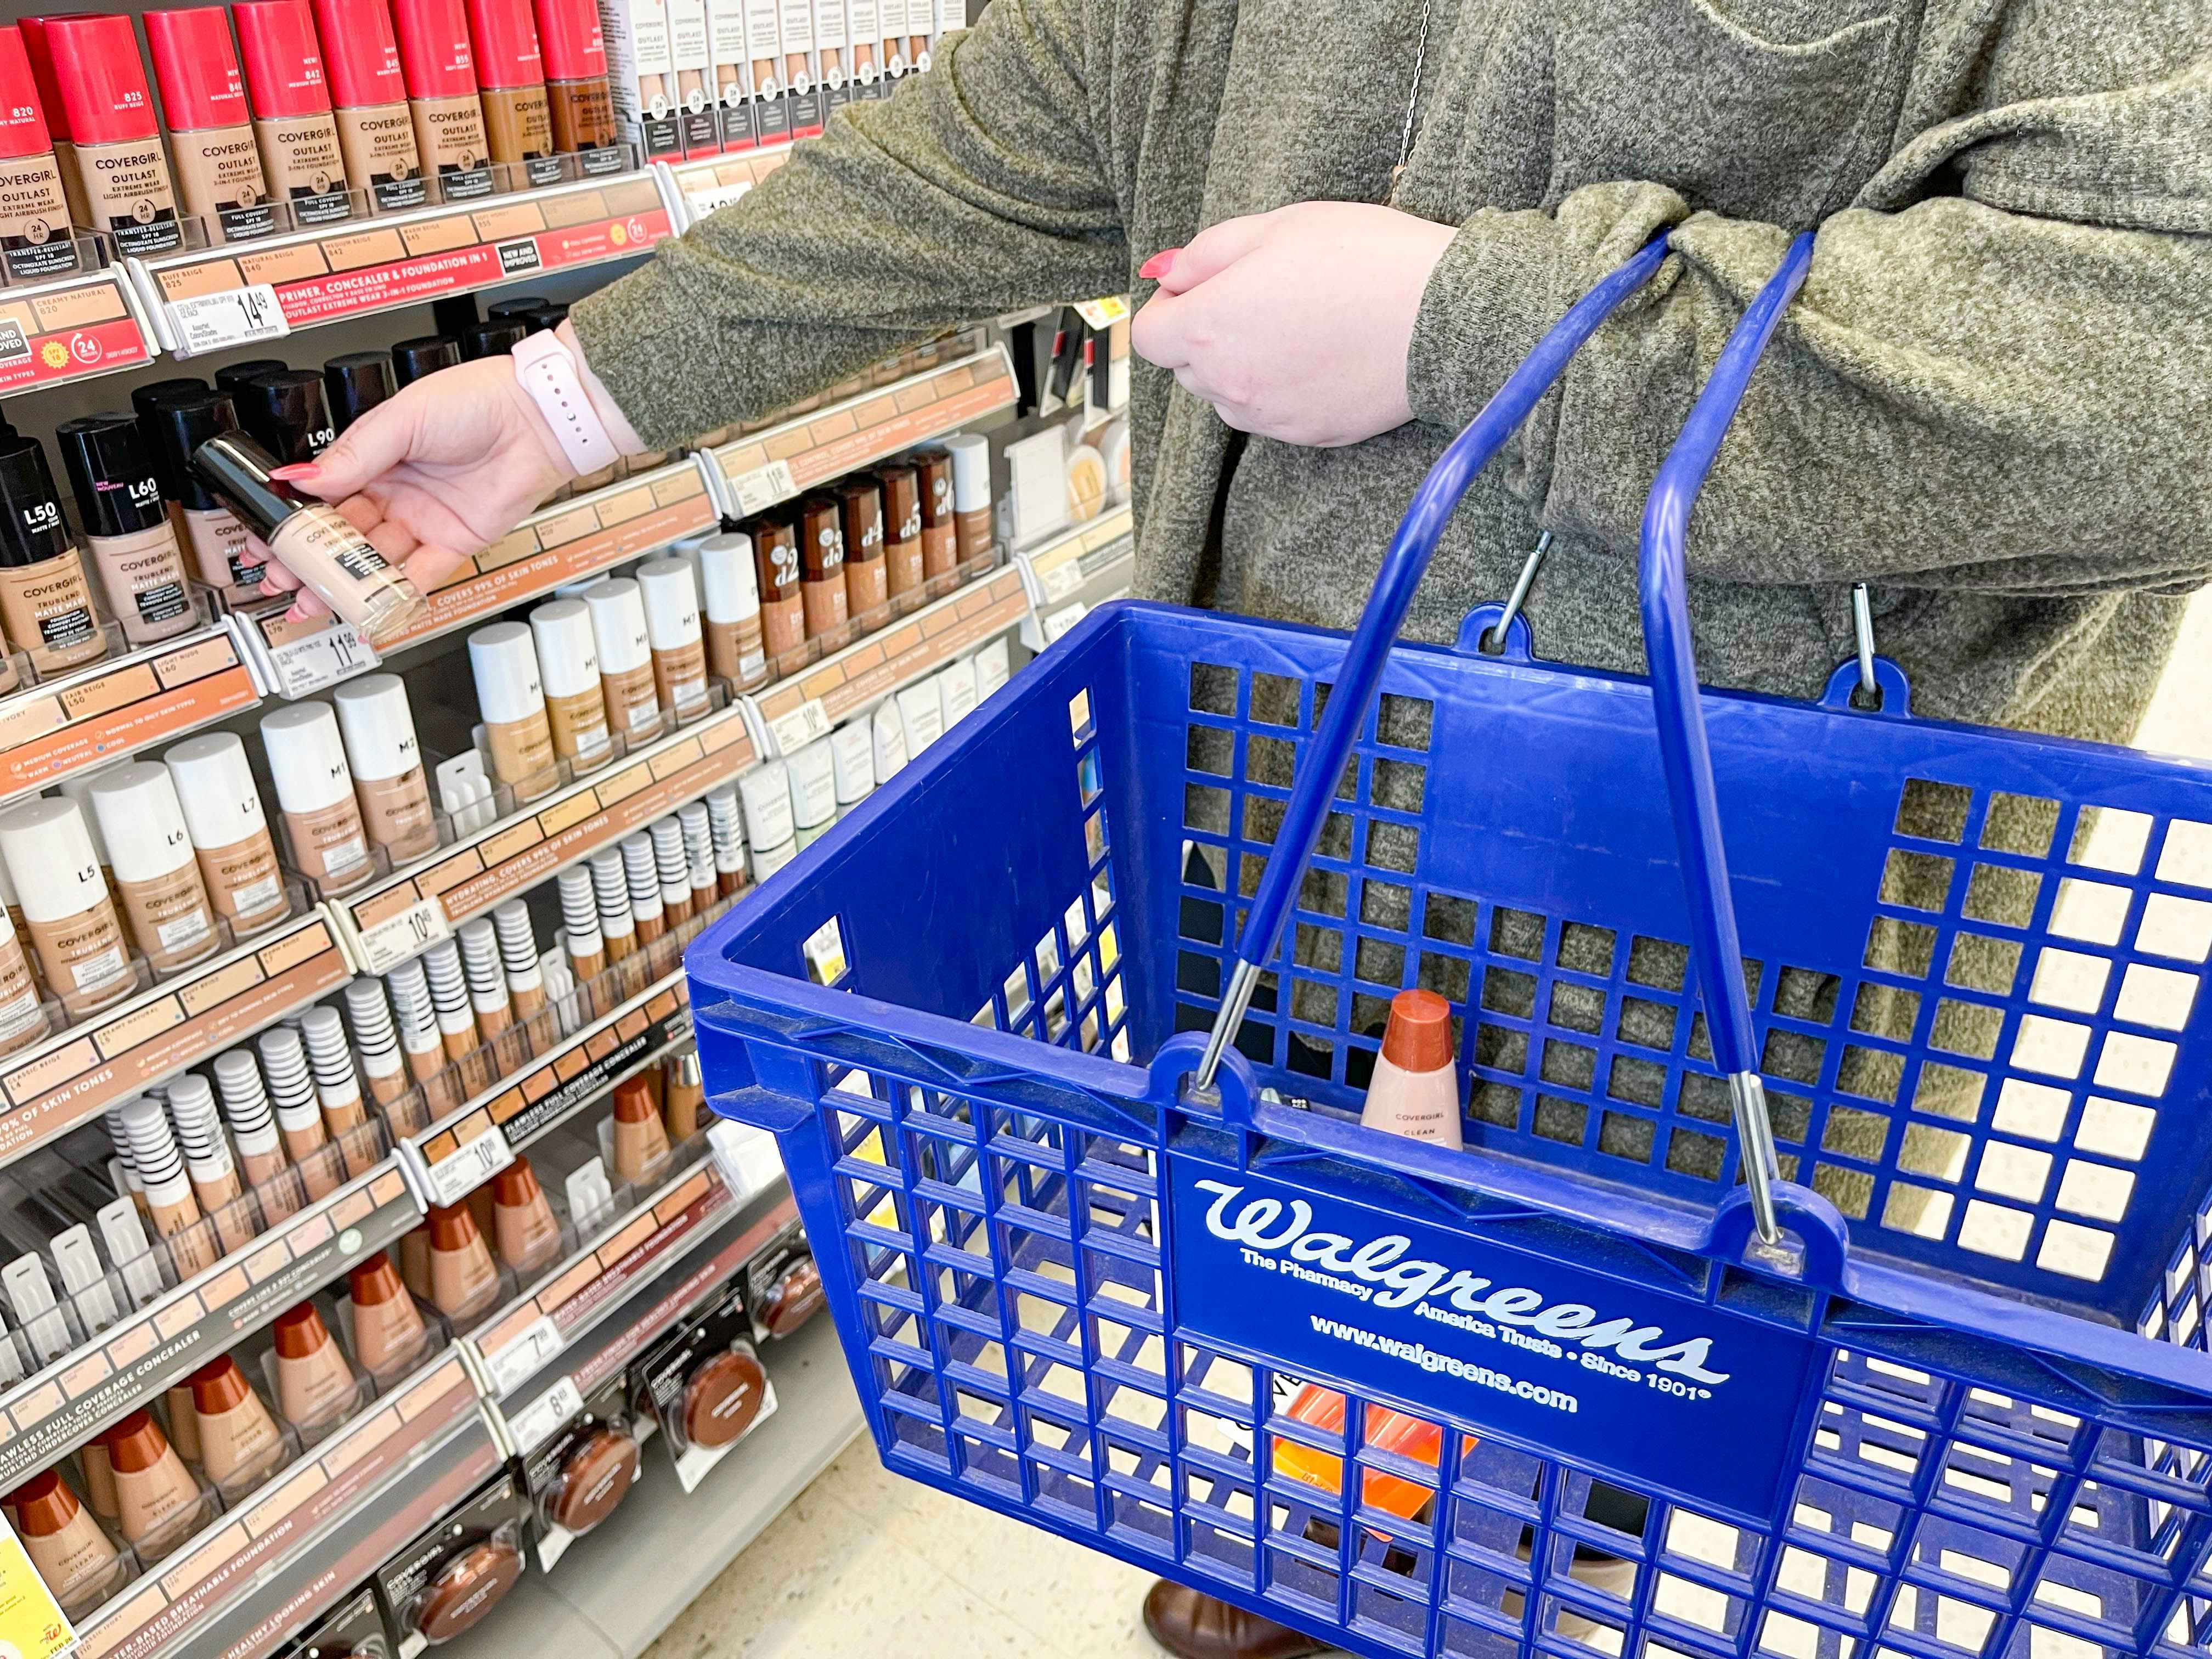 Someone shopping for makeup and putting stuff in a Walgreens basket